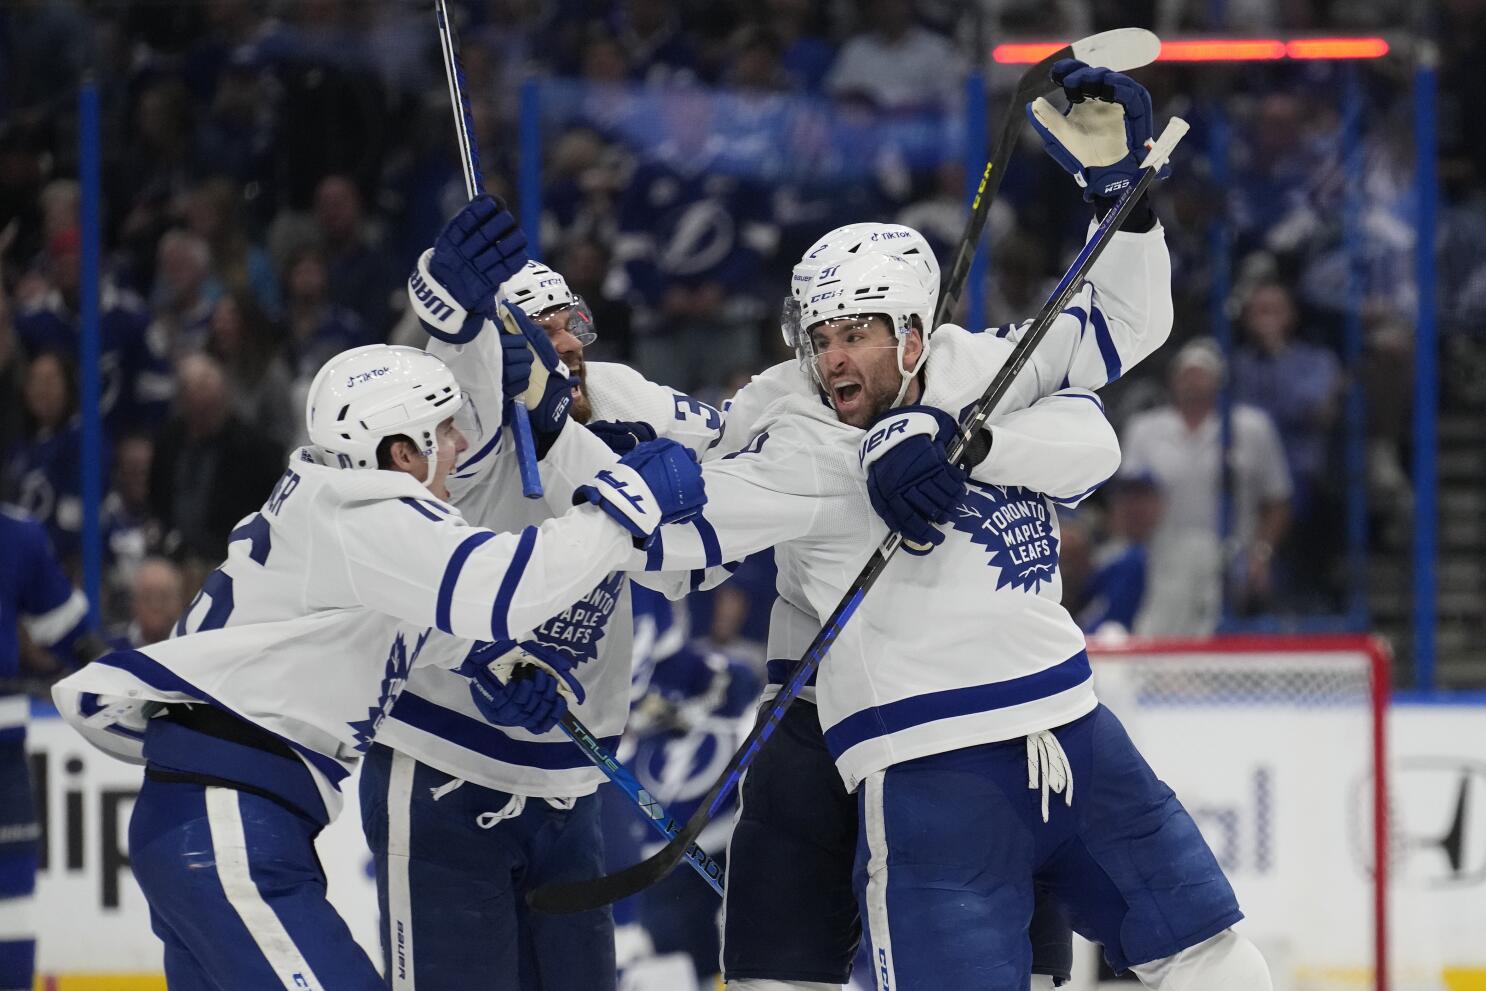 Maple Leafs win in overtime after Devils score own goal